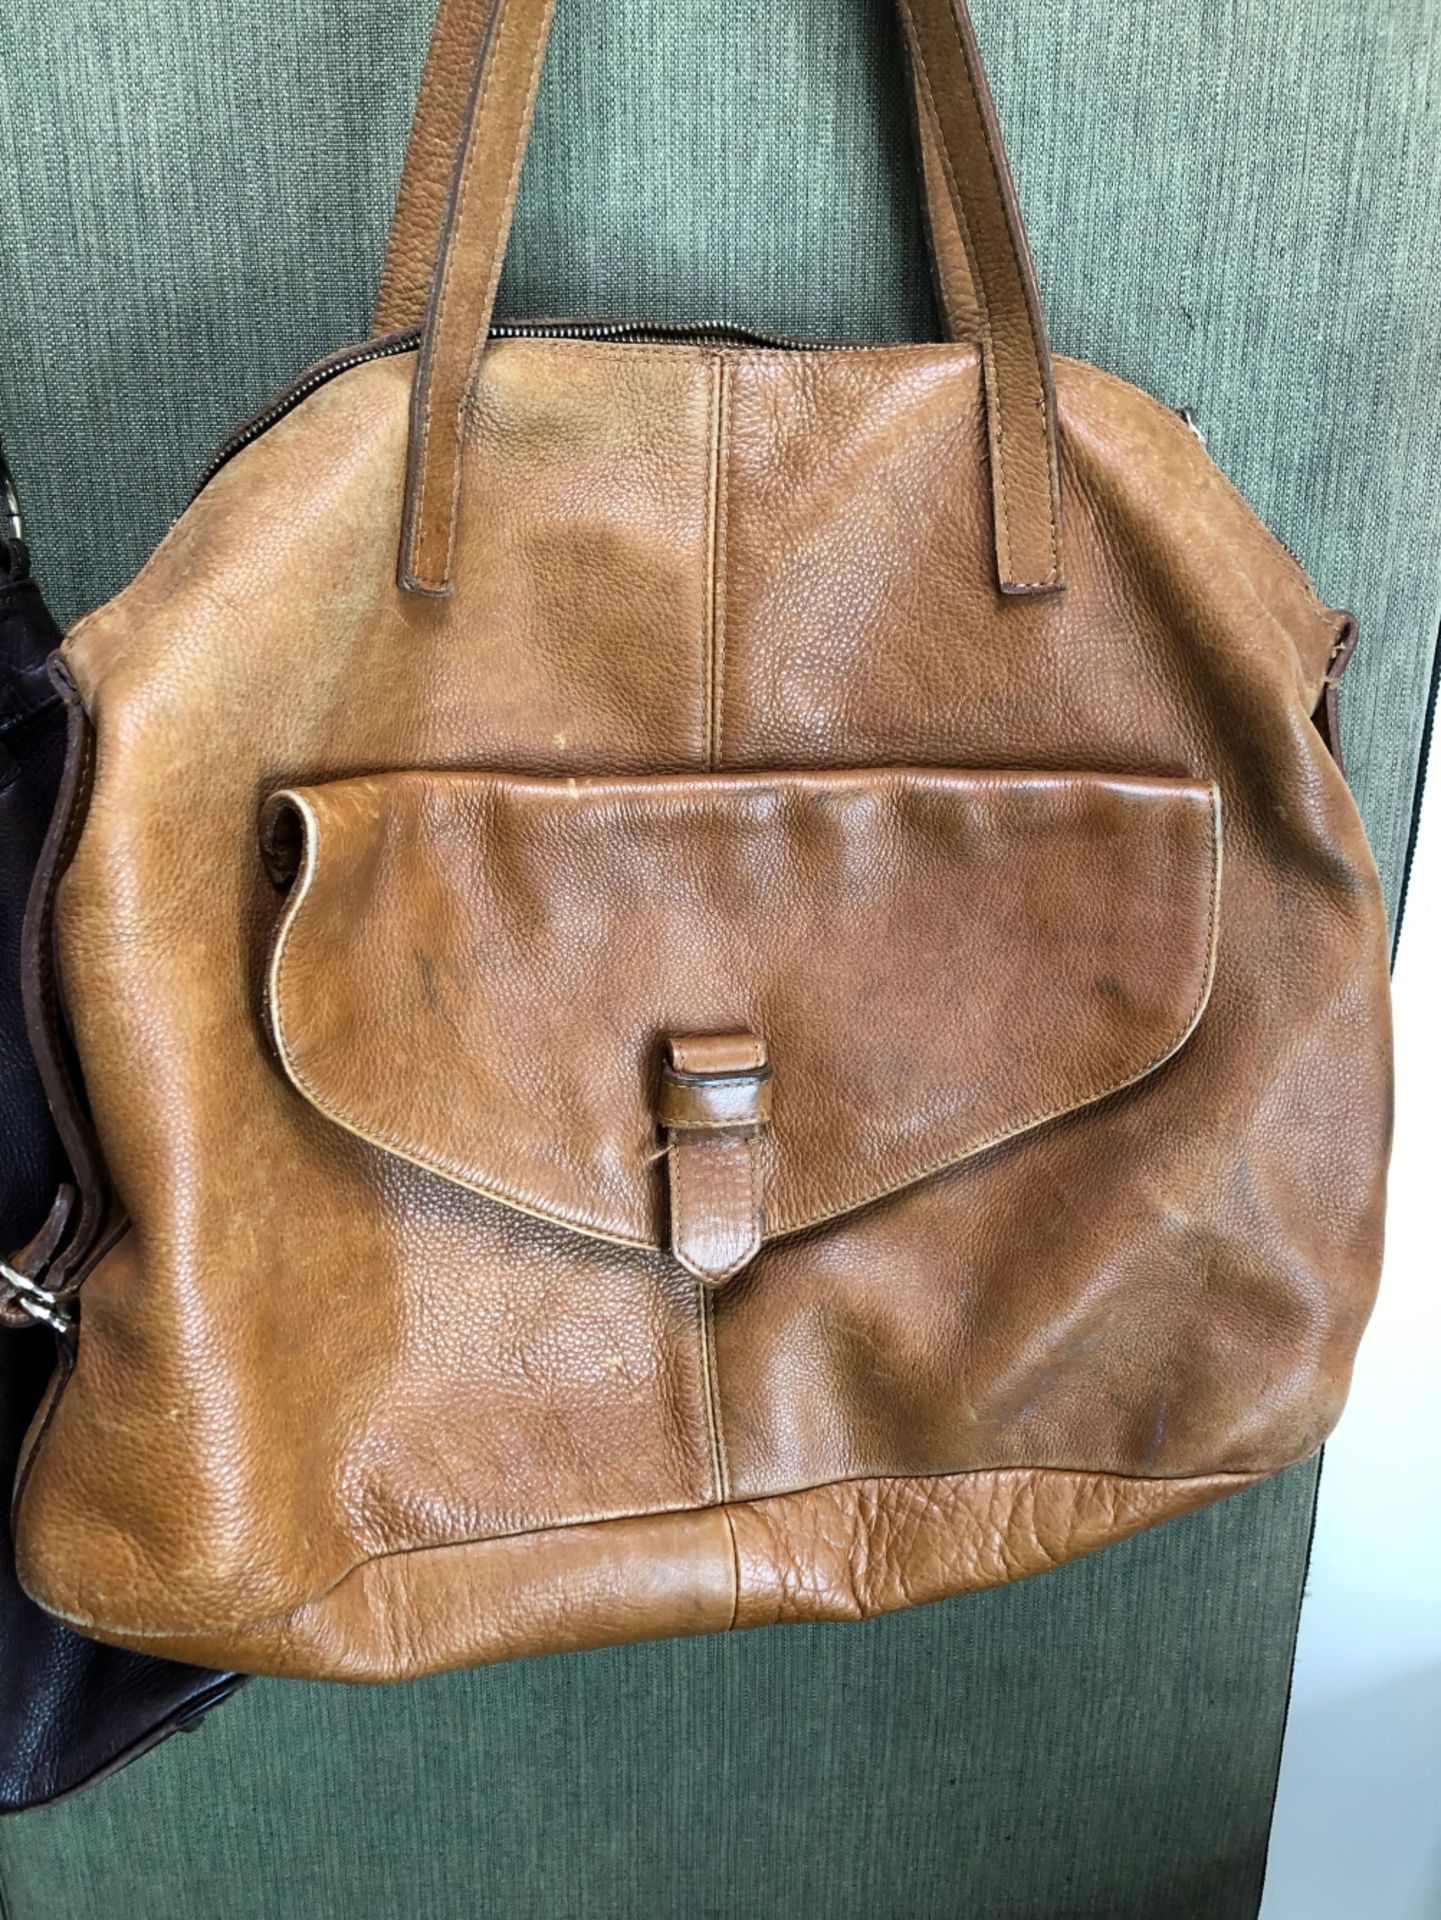 A ZARA WOMAN LARGE BROWN HANDBAG W 45cm, TOGETHER WITH A DARK BROWN LEATHER PAUL COSTELLOE BAG, A - Image 6 of 11